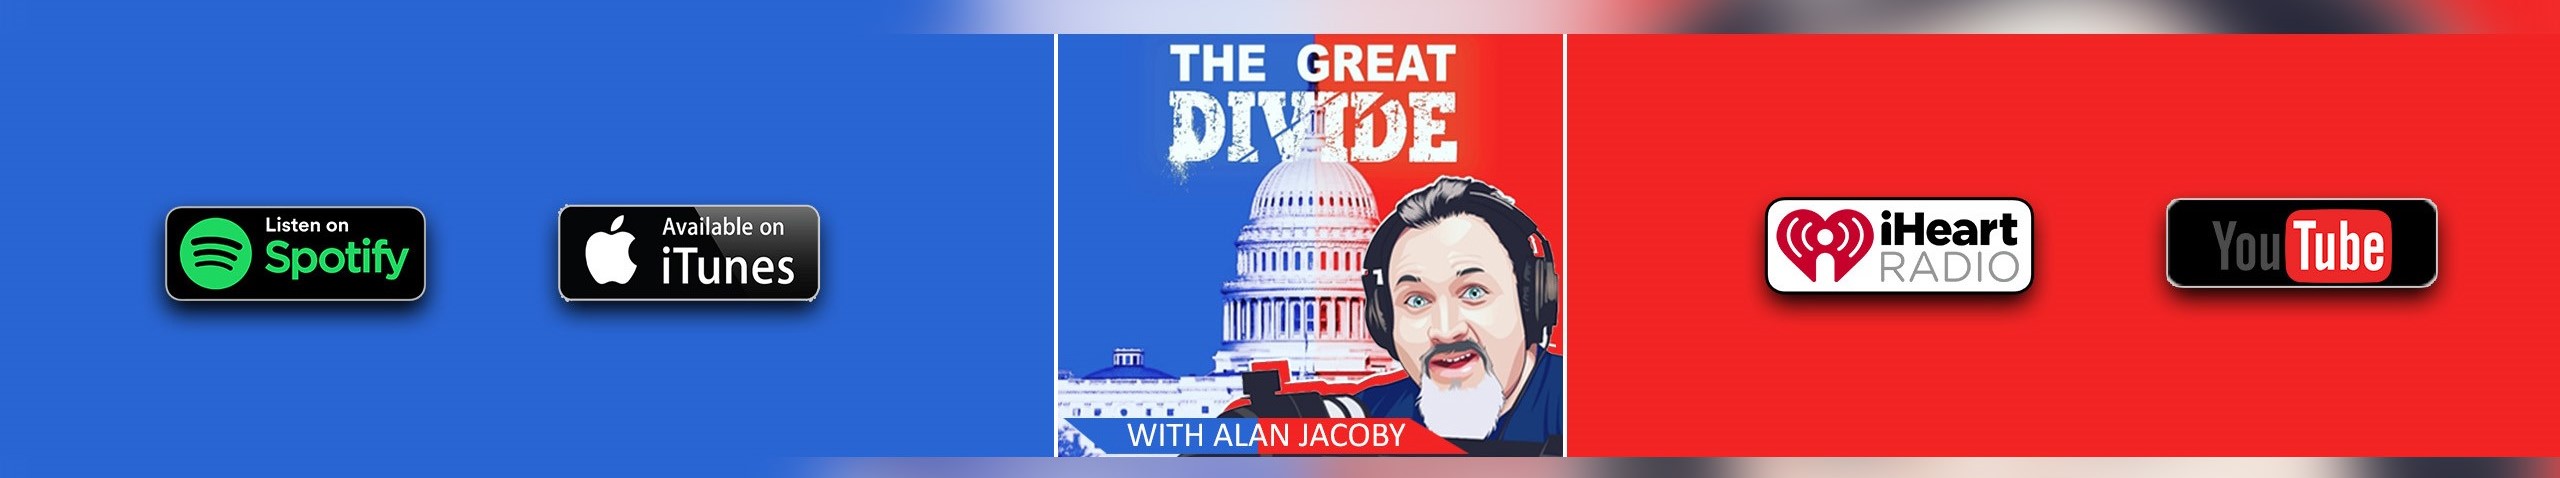 The Great Divide Podcast with Alan Jacoby